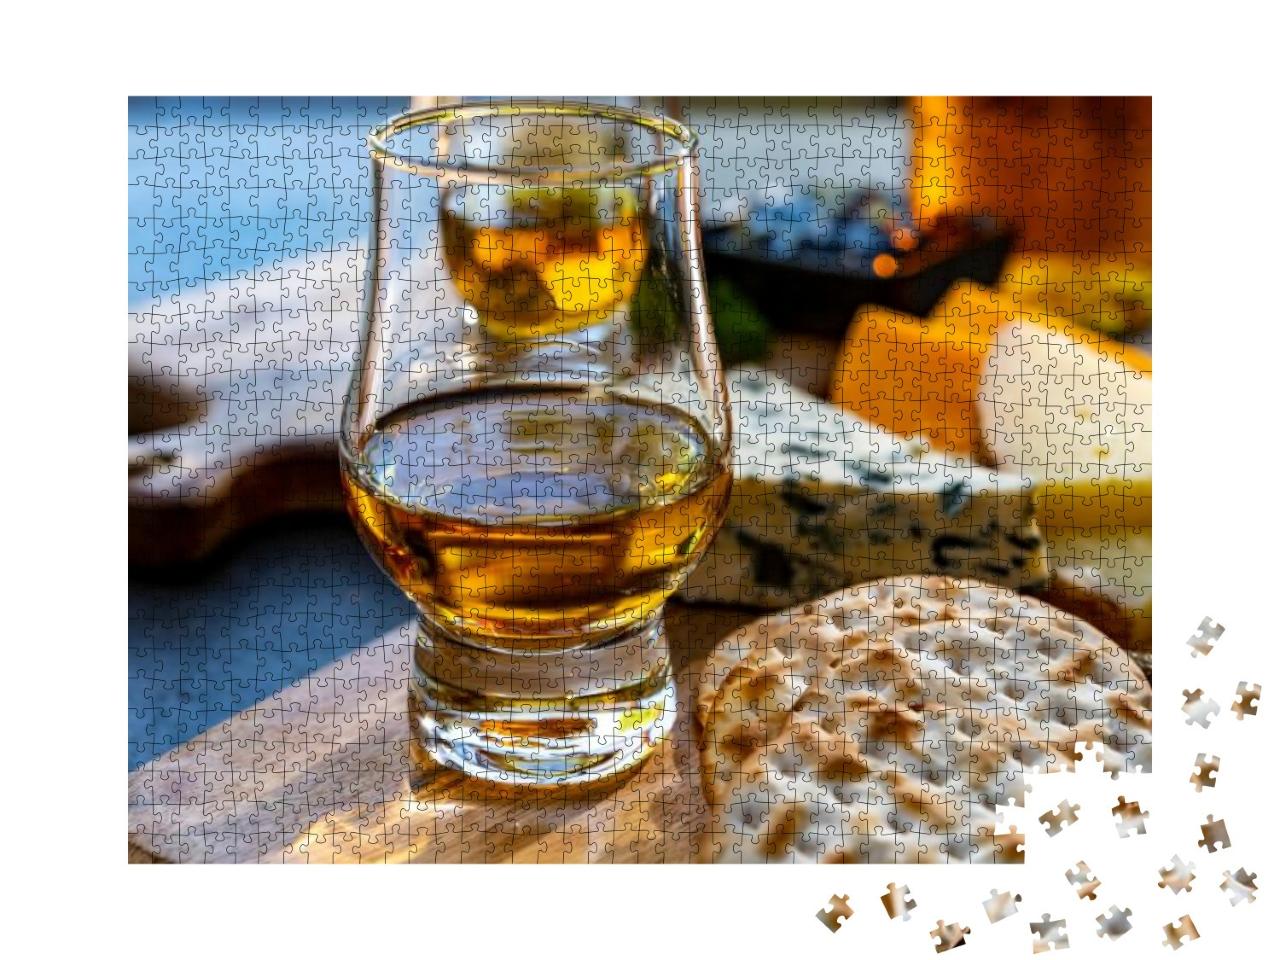 Whiskey & Cheese Pairing, Tasting Whisky Glasses & Plate... Jigsaw Puzzle with 1000 pieces